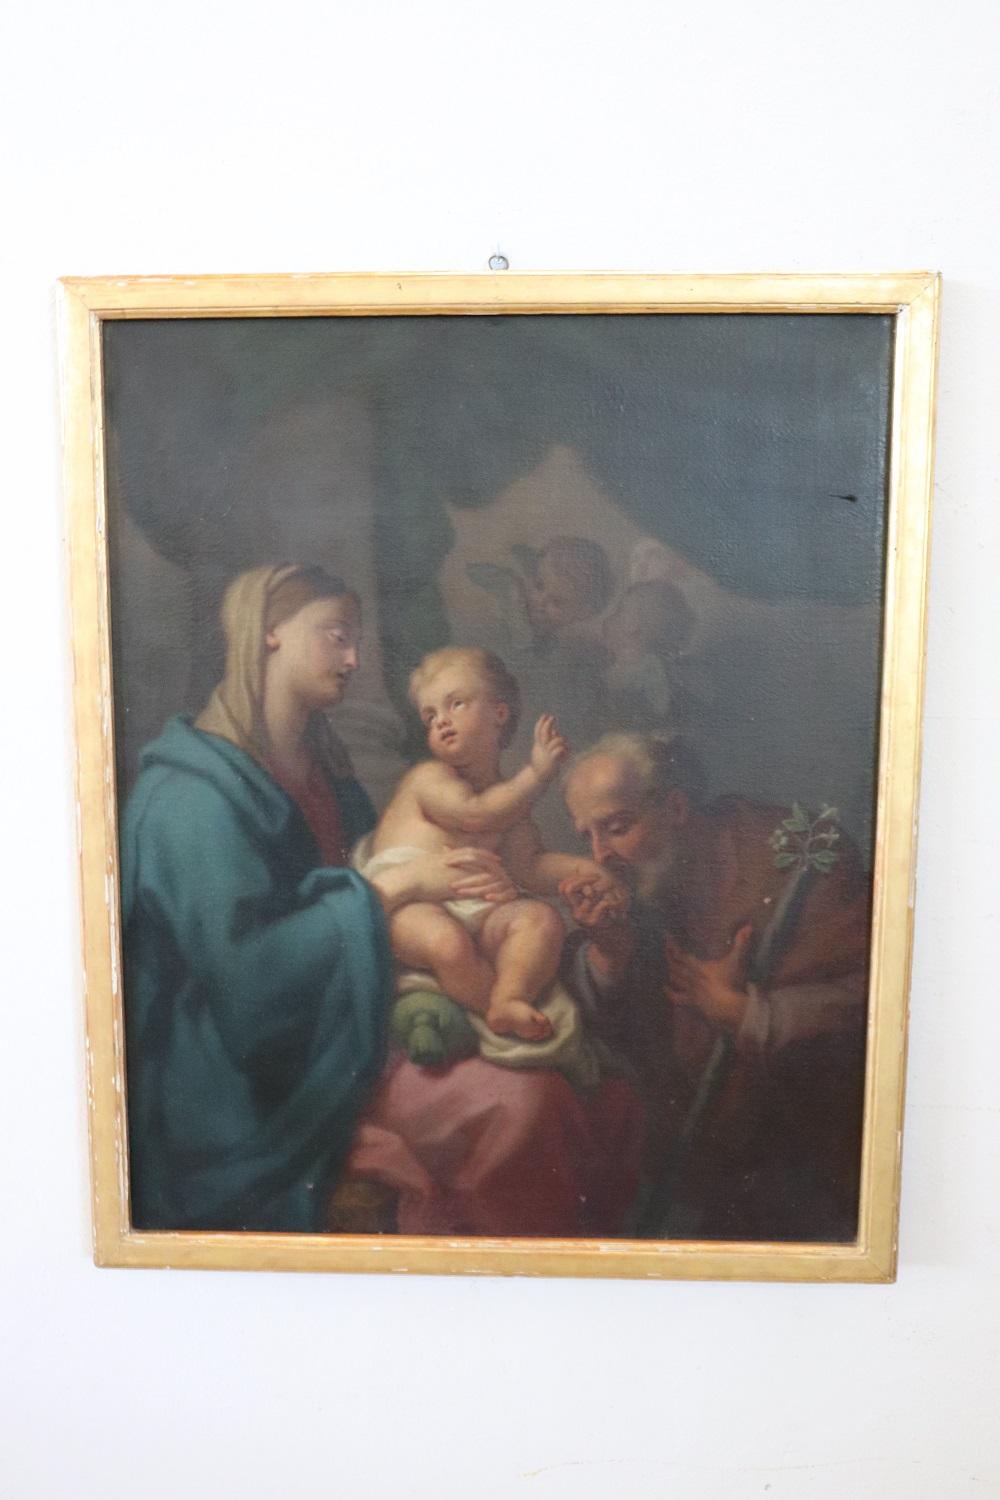 Beautiful antique Italian oil painting on canvas. Excellent pictorial quality great attention to detail. Italian school of the 18th century. Not signed. A beautiful religious painting representing the apparition of the Madonna and Child to Sant